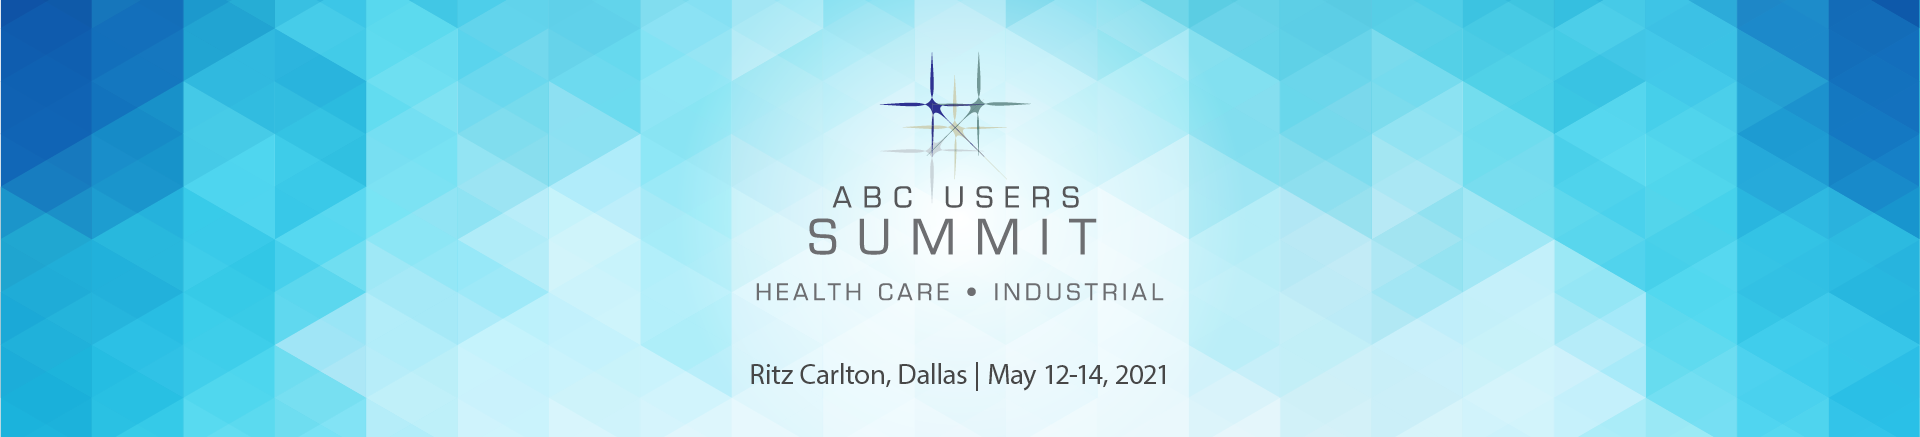 2021 Users Summit Banner (1920) big text